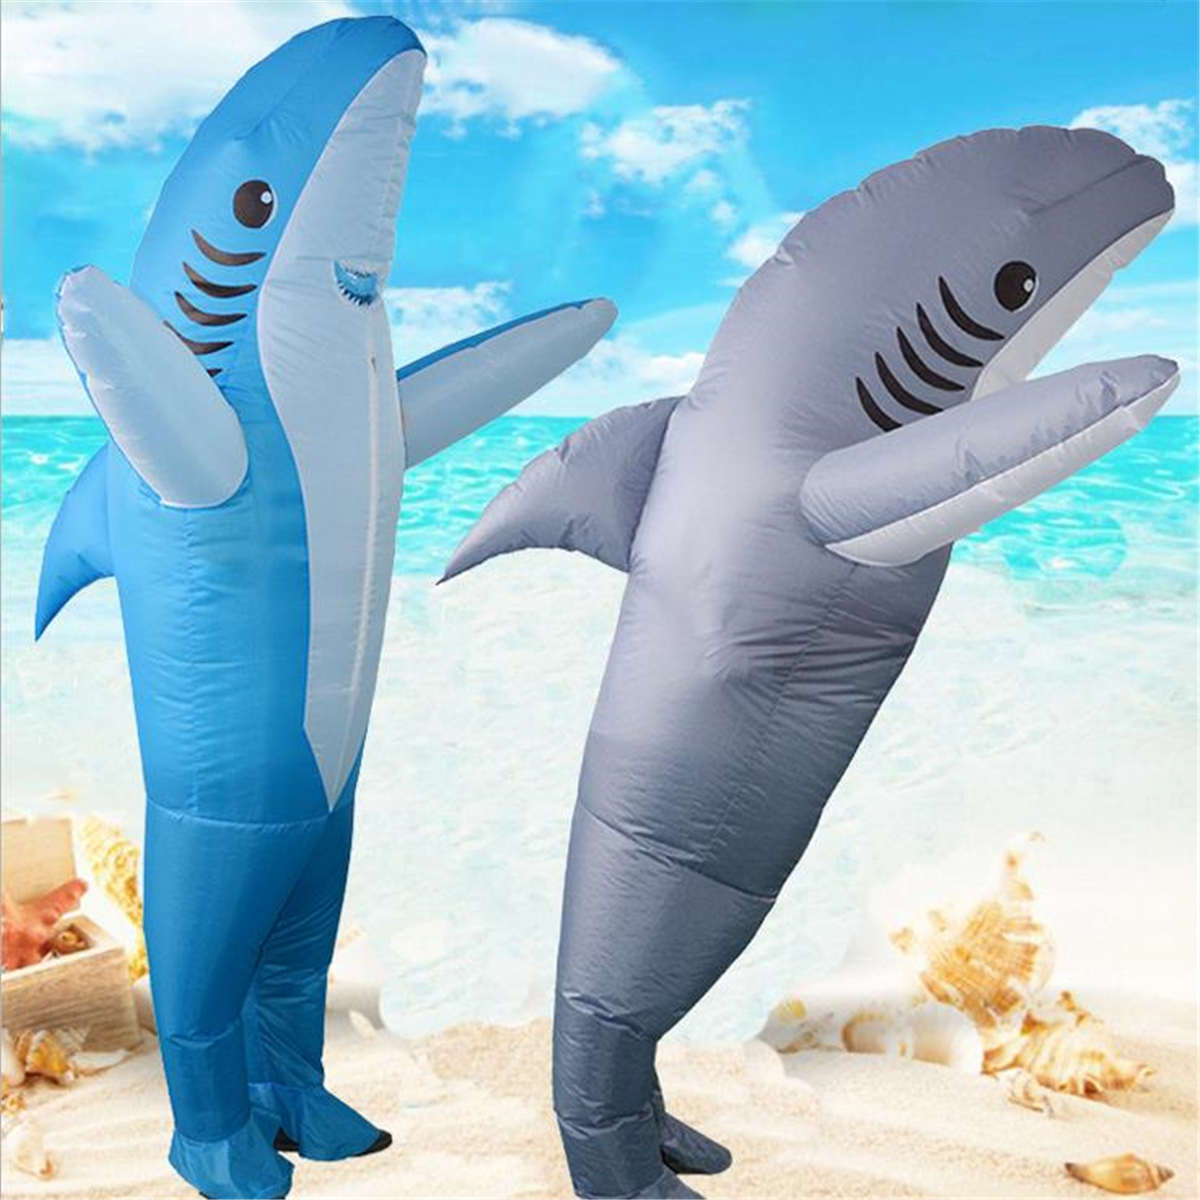 Inflatable Costumes Shark Adult Halloween Fancy Dress Funny Scary Dress